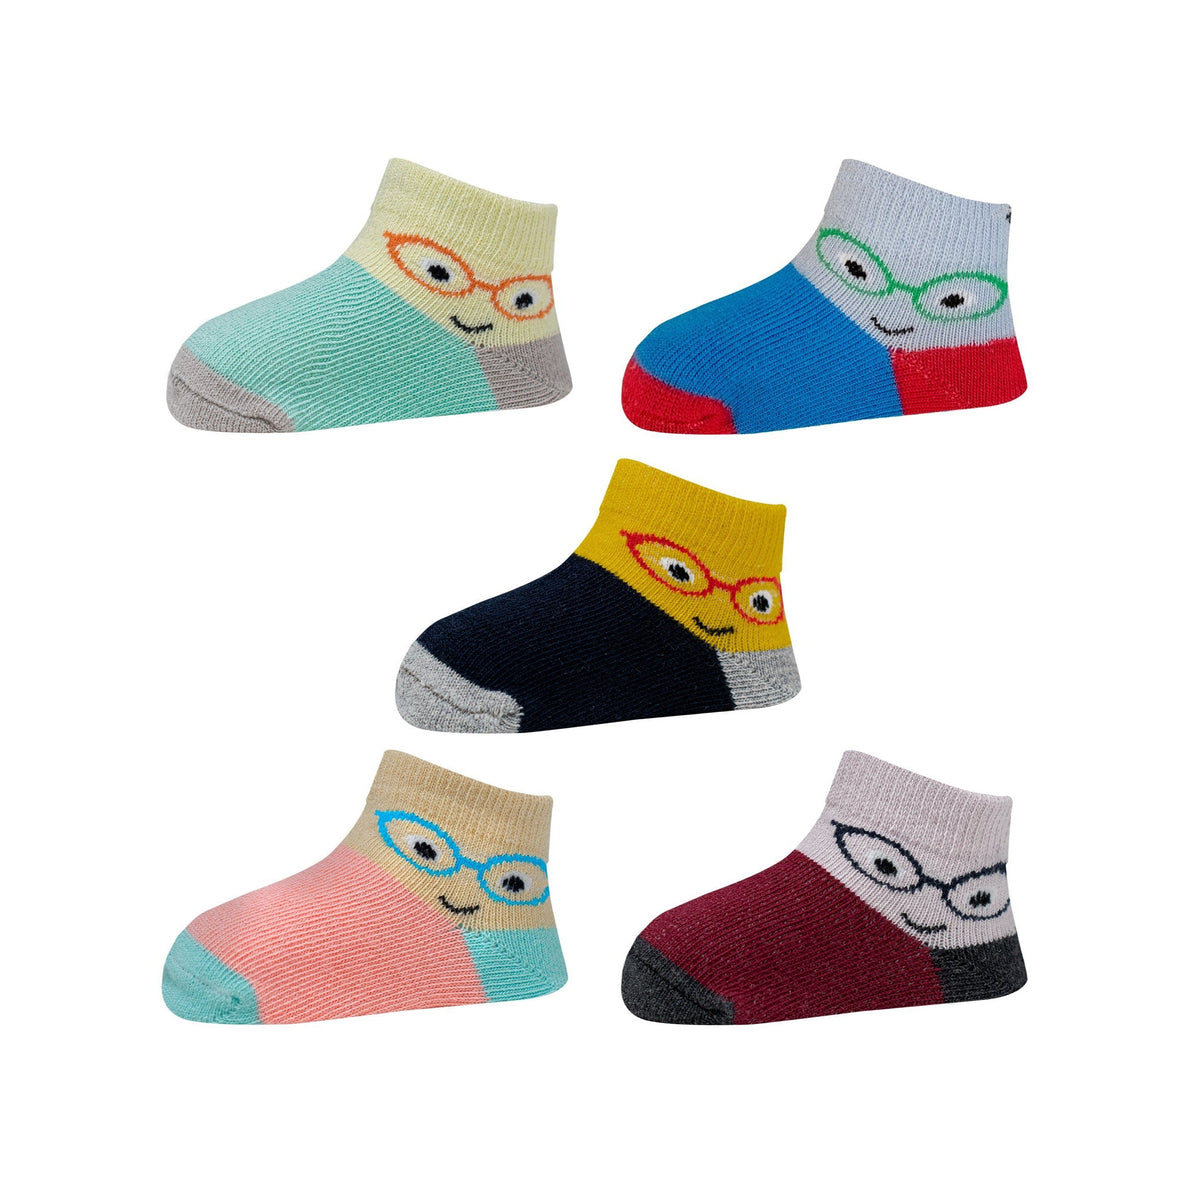 Kids Cotton Antibacterial Ankle length Socks - YW-ASP-8015 - Pack of 5 Pairs